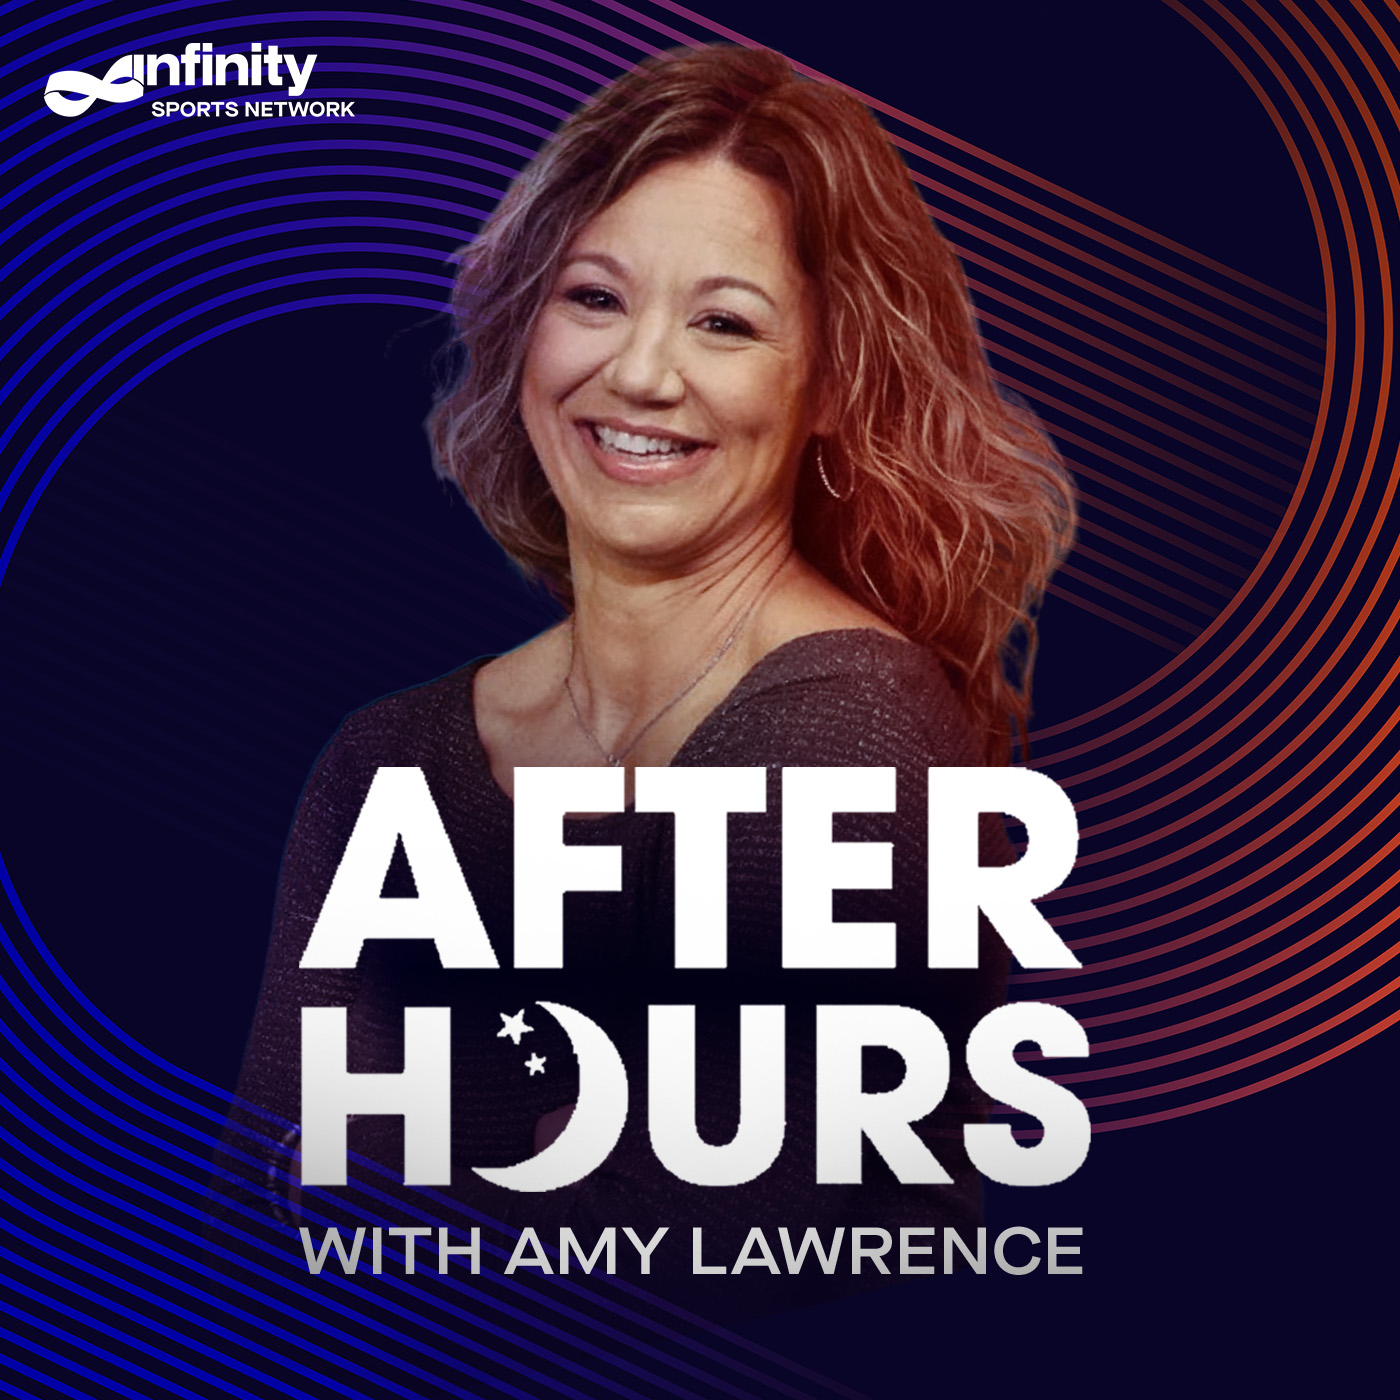 7/14/21 After Hours with Amy Lawrence PODCAST: Hour 2